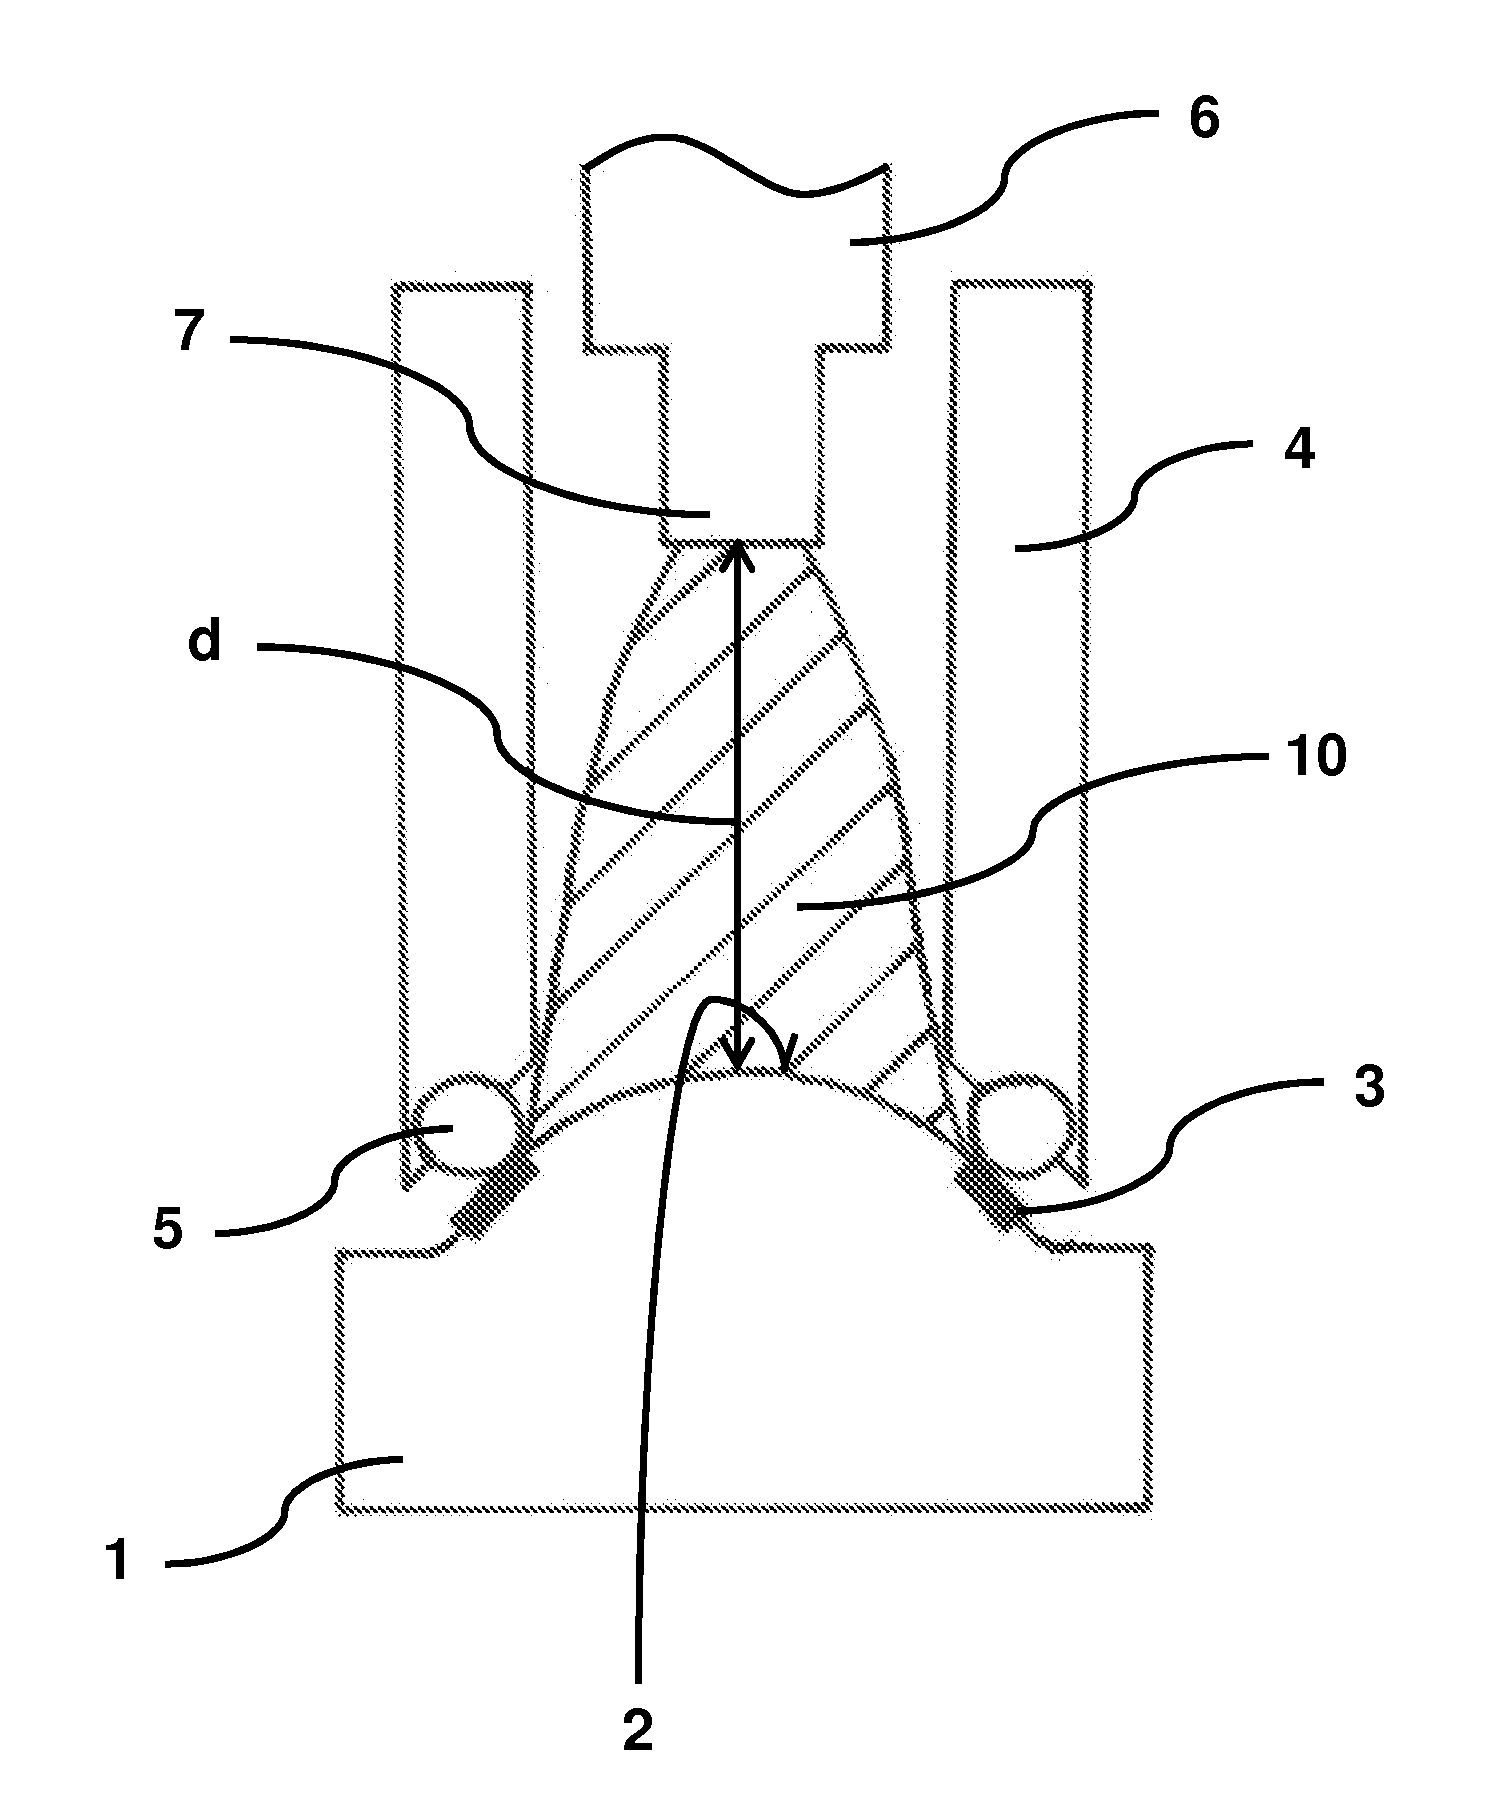 Method of Treating a Lens Forming Surface of at Least One Mold Half of a Mold for Molding Ophthalmic Lenses